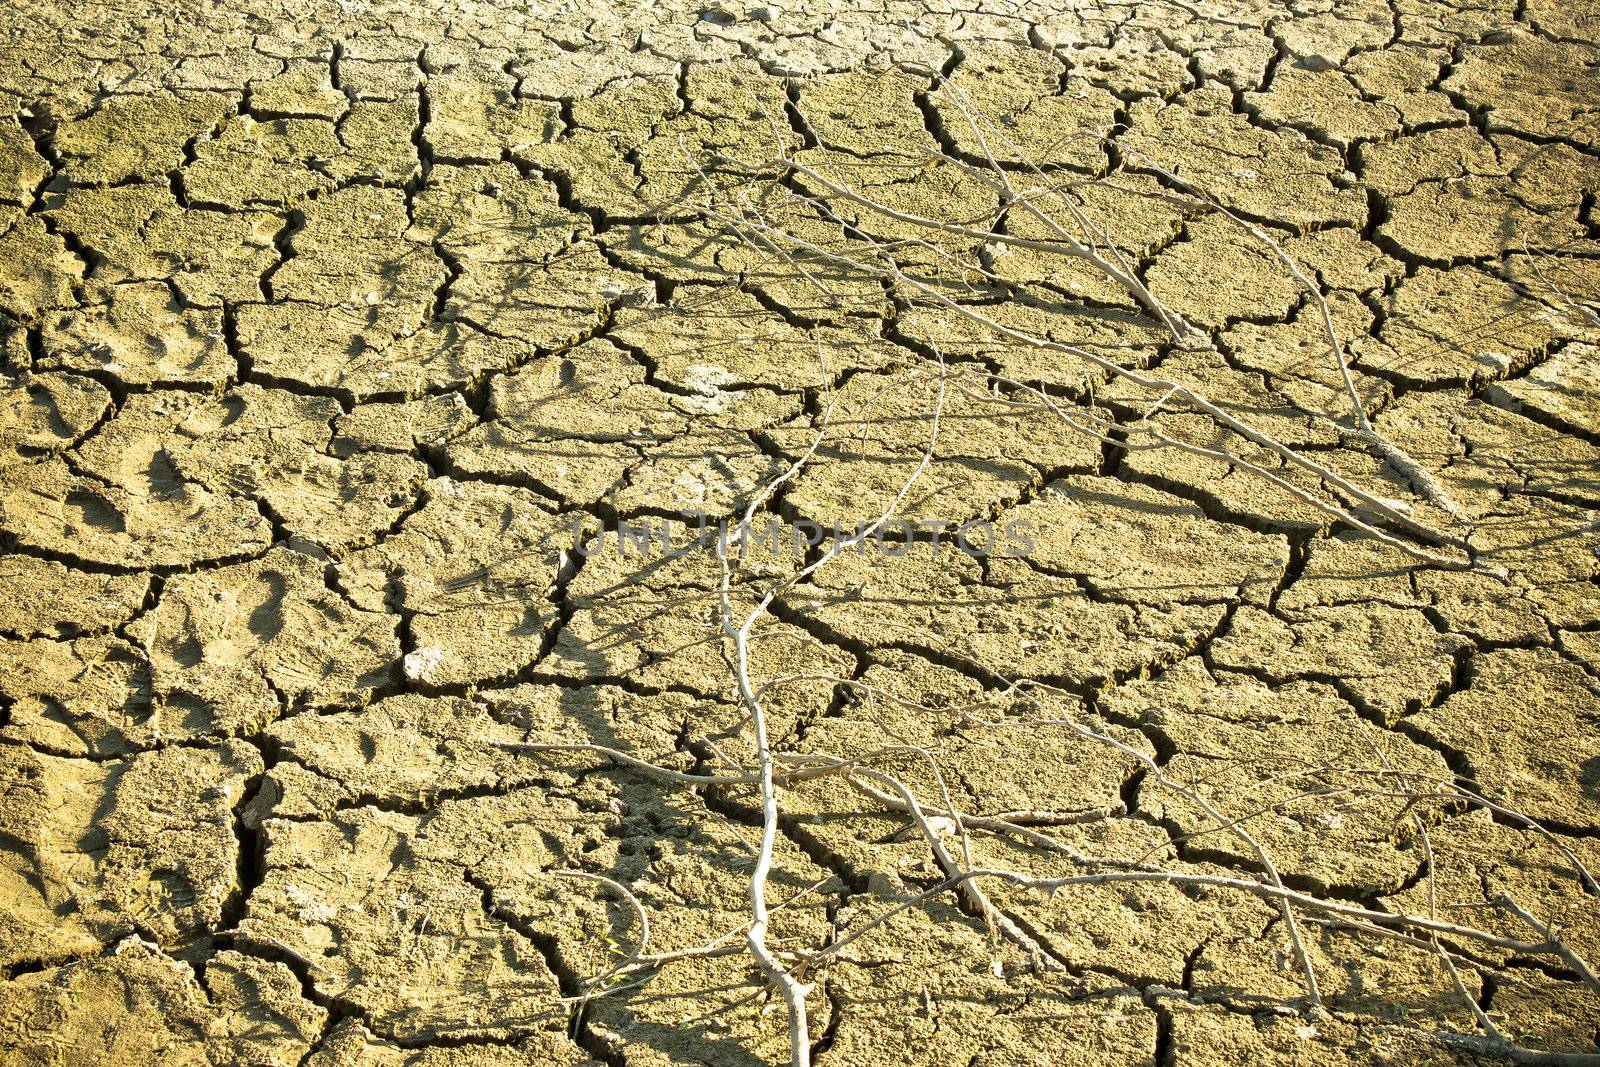 Dry soil in lake bottom during dryness by xbrchx